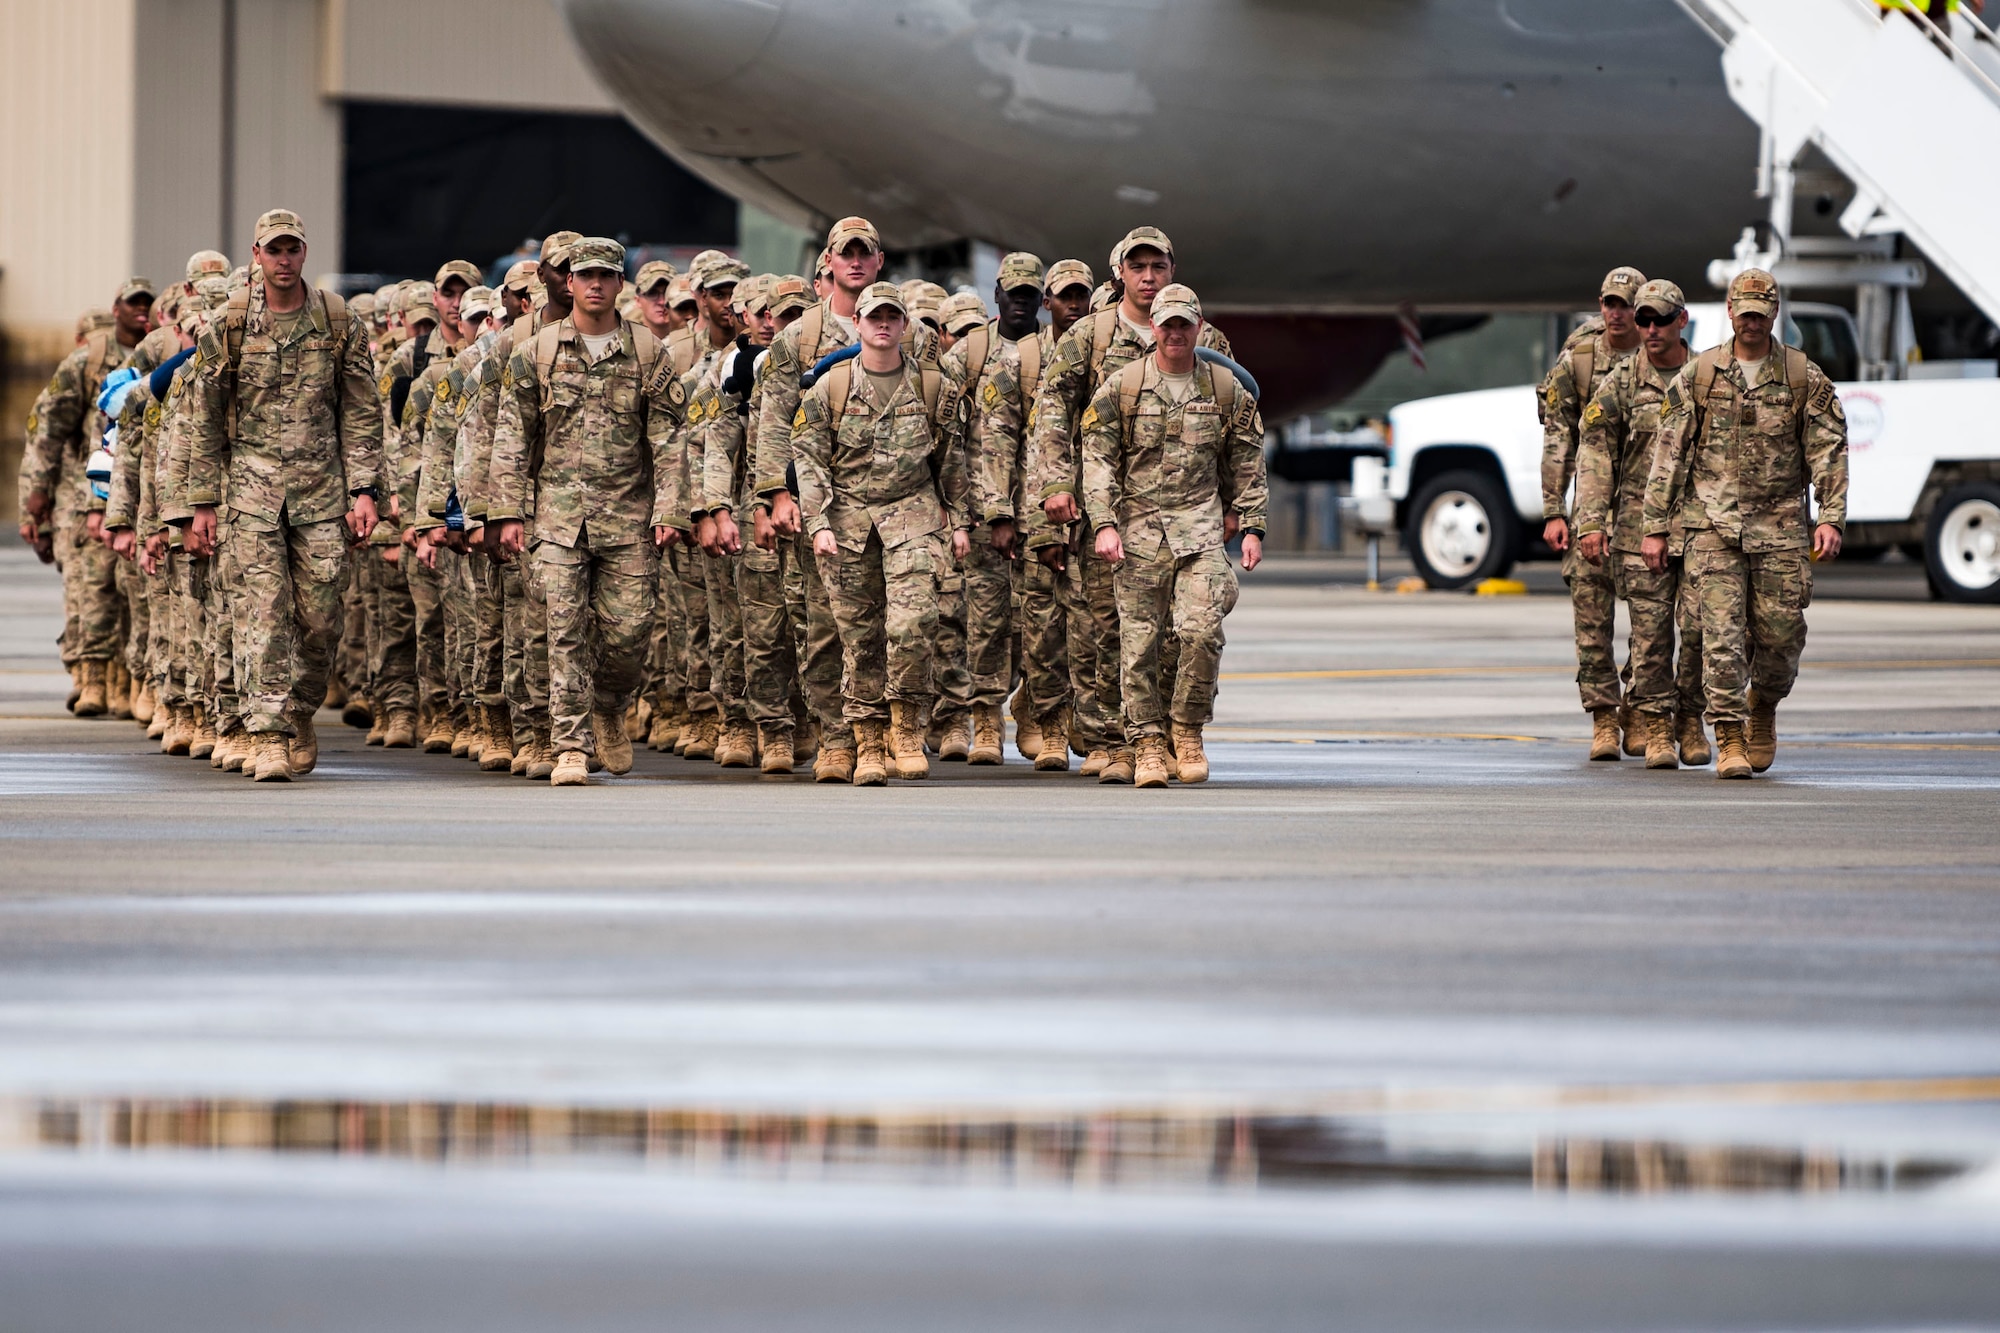 Airmen from the 823d Base Defense Squadron (BDS) march to their loved ones during a redeployment ceremony, Oct. 26, 2018, at Moody Air Force Base, Ga. The 822d, 823d and 824th BDS’s provide high-risk force protection and integrated base defense for expeditionary air forces. Airmen from the 823d BDS just returned home from conducting relief-in-place in the United States Africa Command theater while Airmen from the 824th BDS took their place. (U.S. Air Force photo by Airman Taryn Butler)